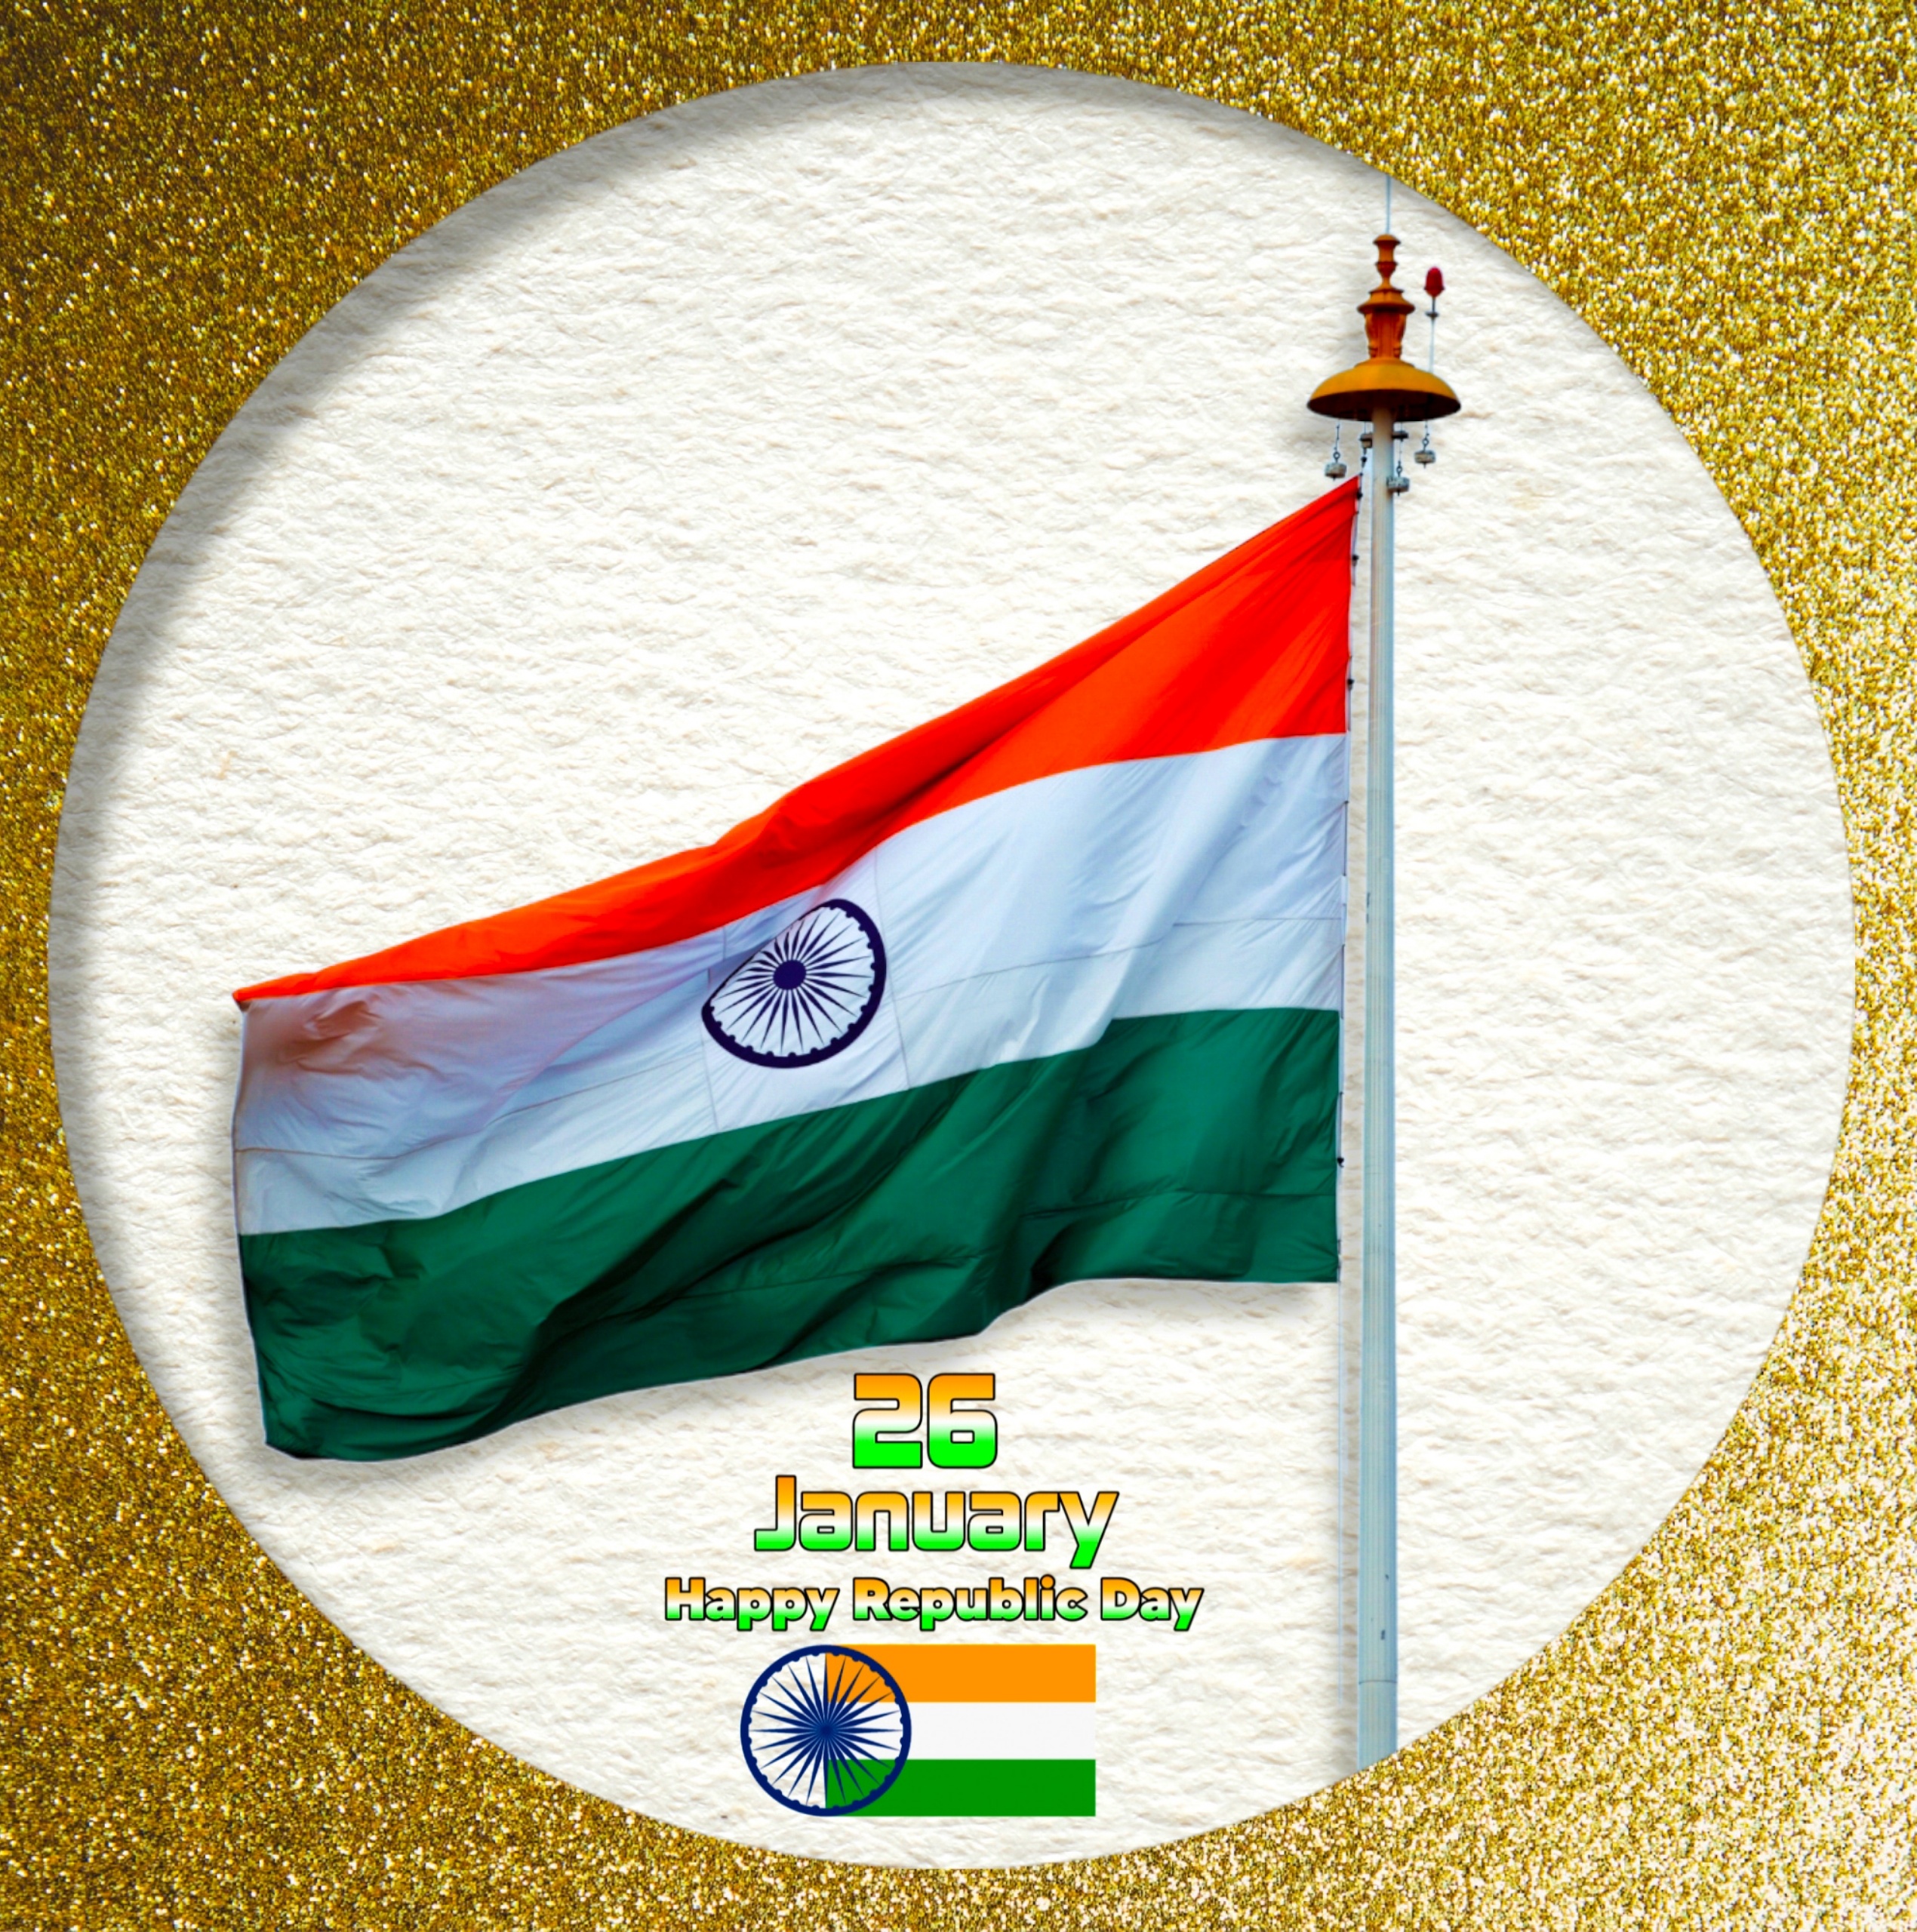 Republic Day HD Image Download 